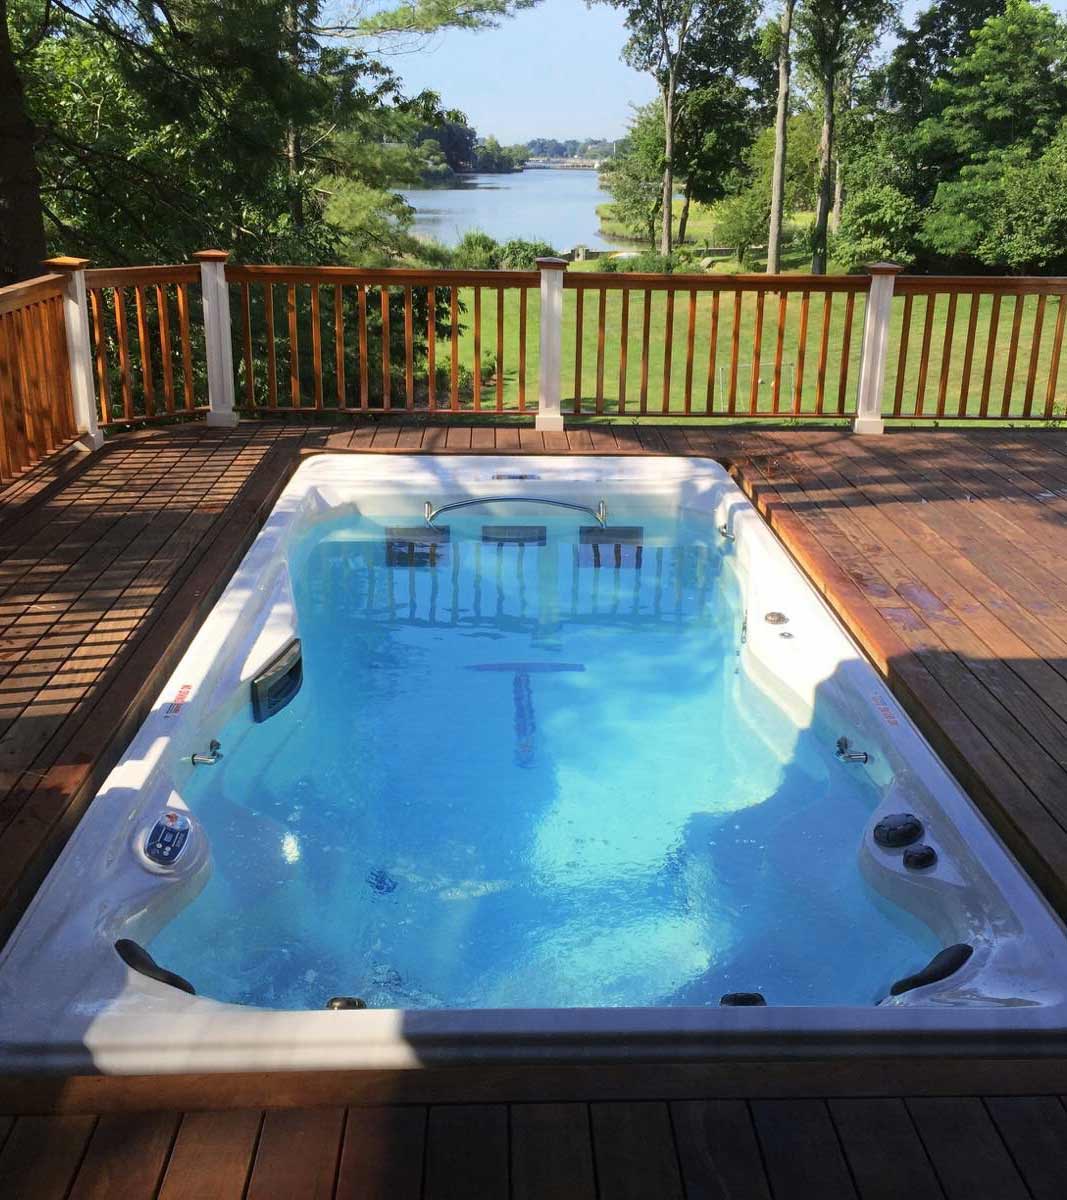 Recessed swim spa installation in a deck with a view of the water